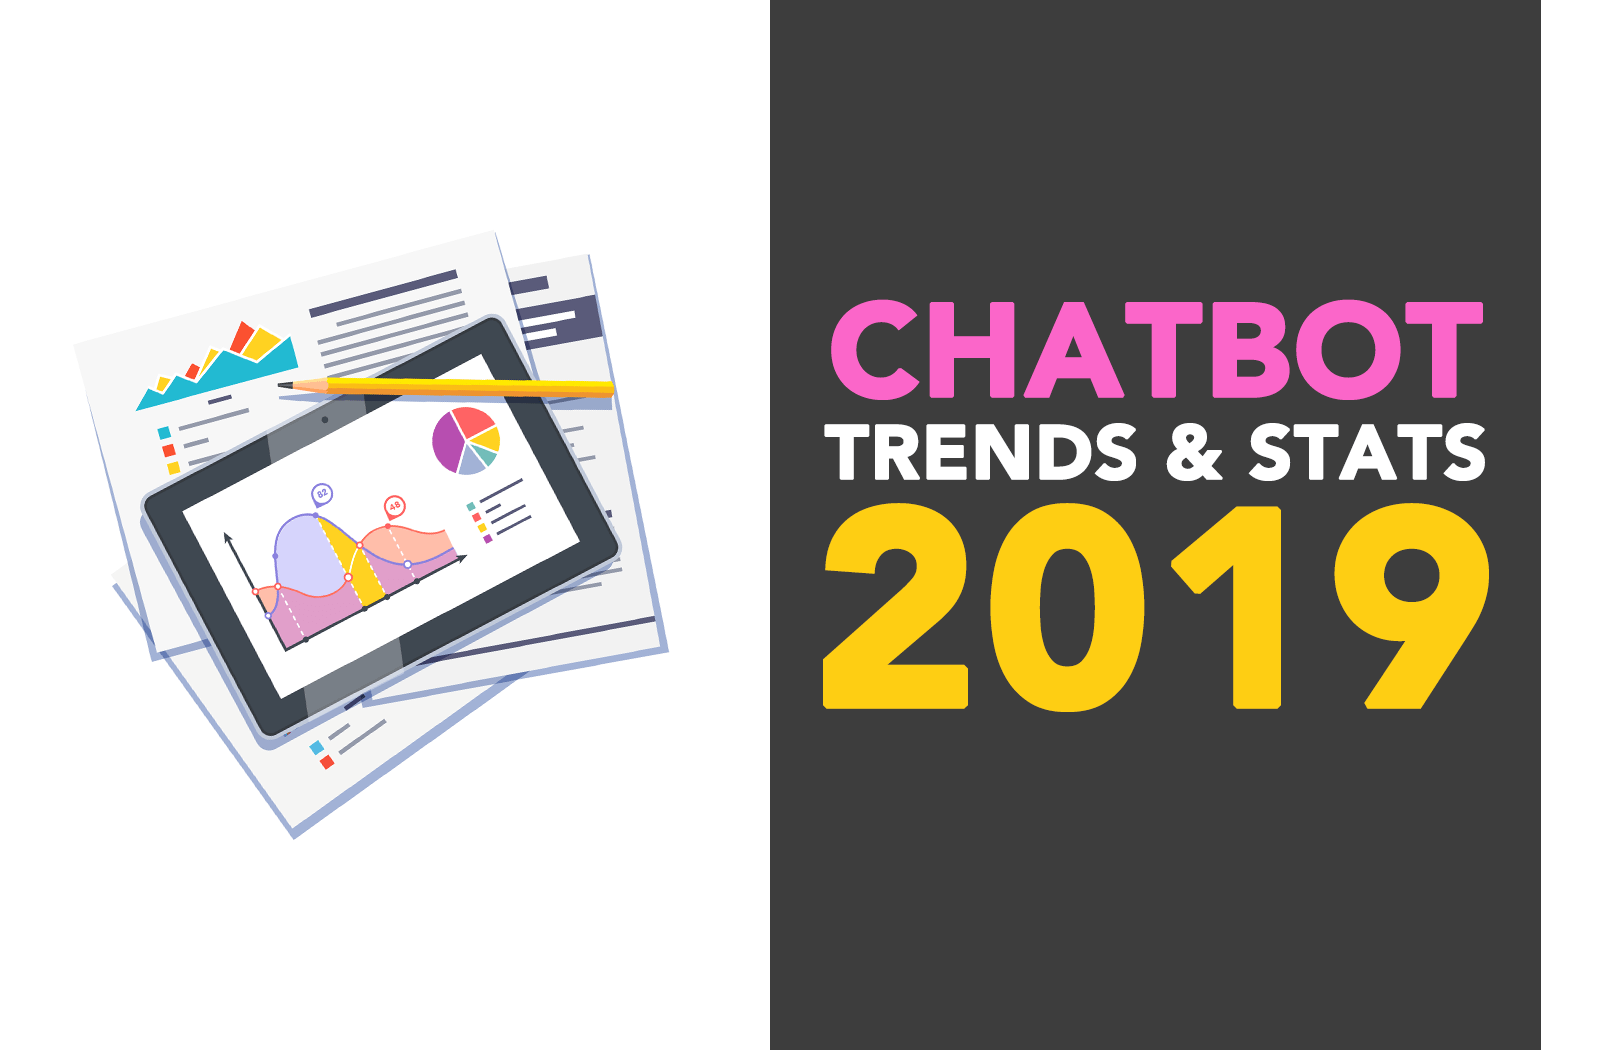 chabot trends & stats 2019